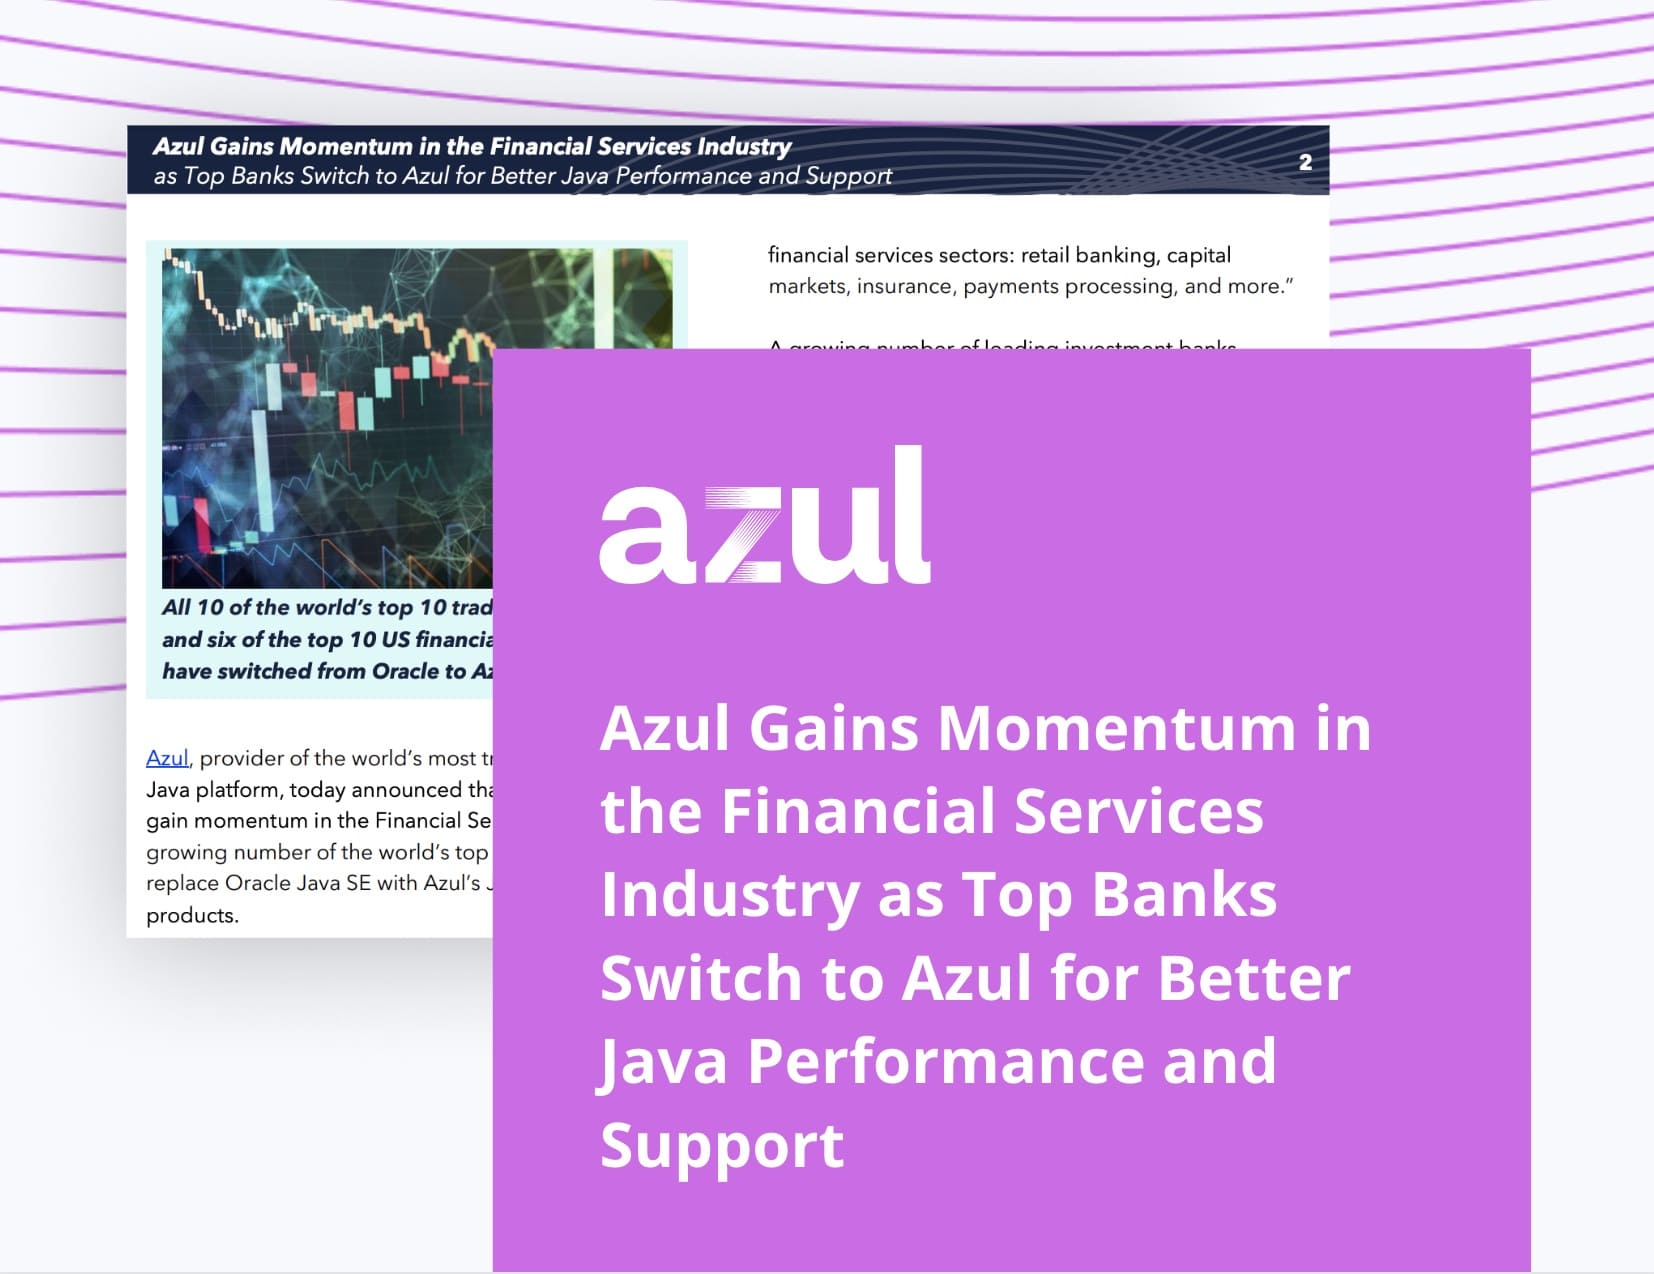 Azul Gains Momentum in the Financial Services Industry as Top Banks Switch to Azul for Better Java Performance and Support